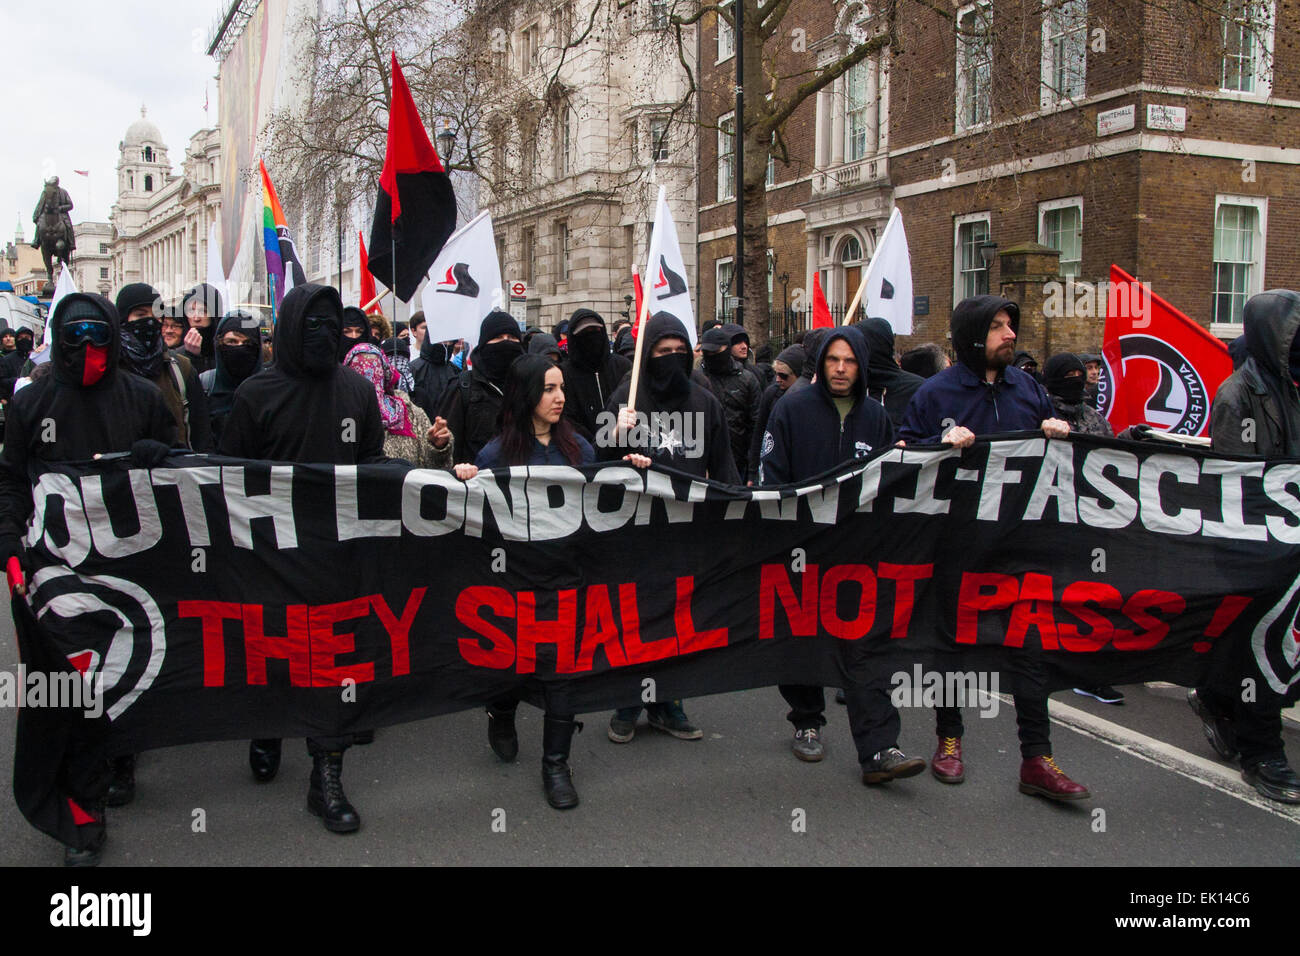 Whitehall, London, April 4th 2015. As PEGIDA UK holds a poorly attended rally on Whitehall, scores of police are called in to contain counter protesters from various London anti-fascist movements. PICTURED: Several dozen anti-fascists march down Whitehall as they counter-protest against PEGIDA. Credit:  Paul Davey/Alamy Live News Stock Photo